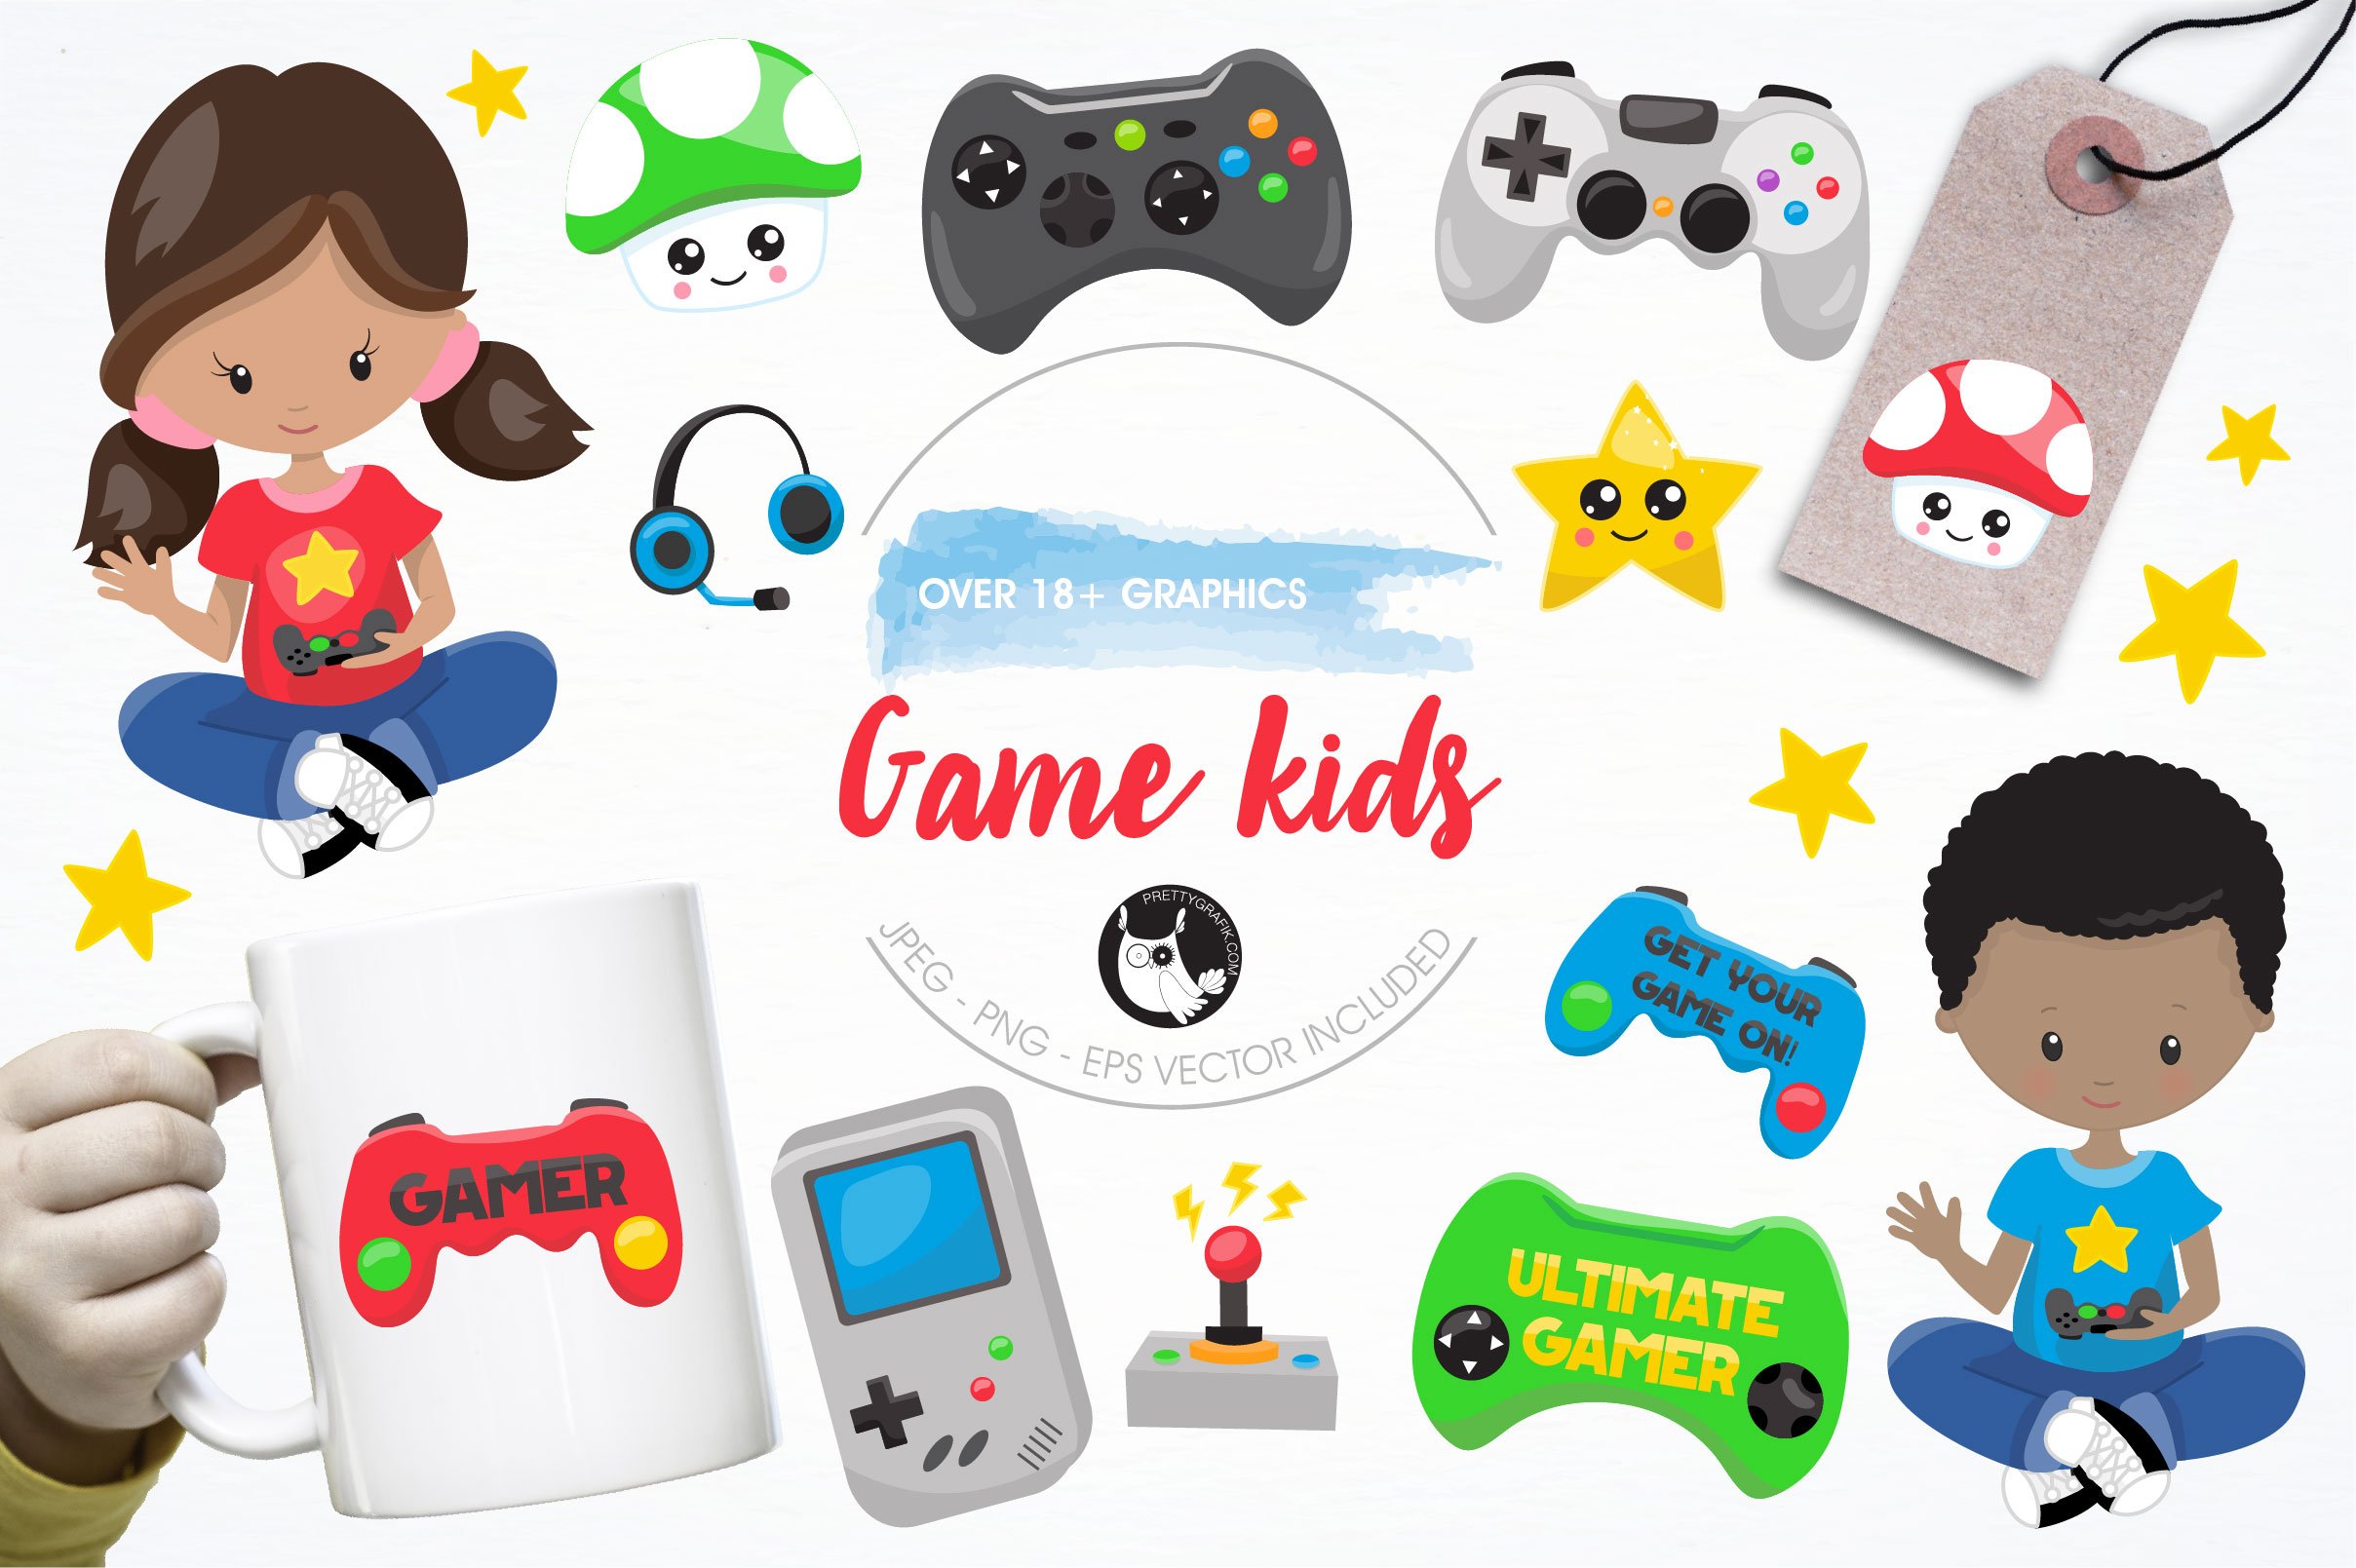 Game kids graphics & illustrations - Vector Image